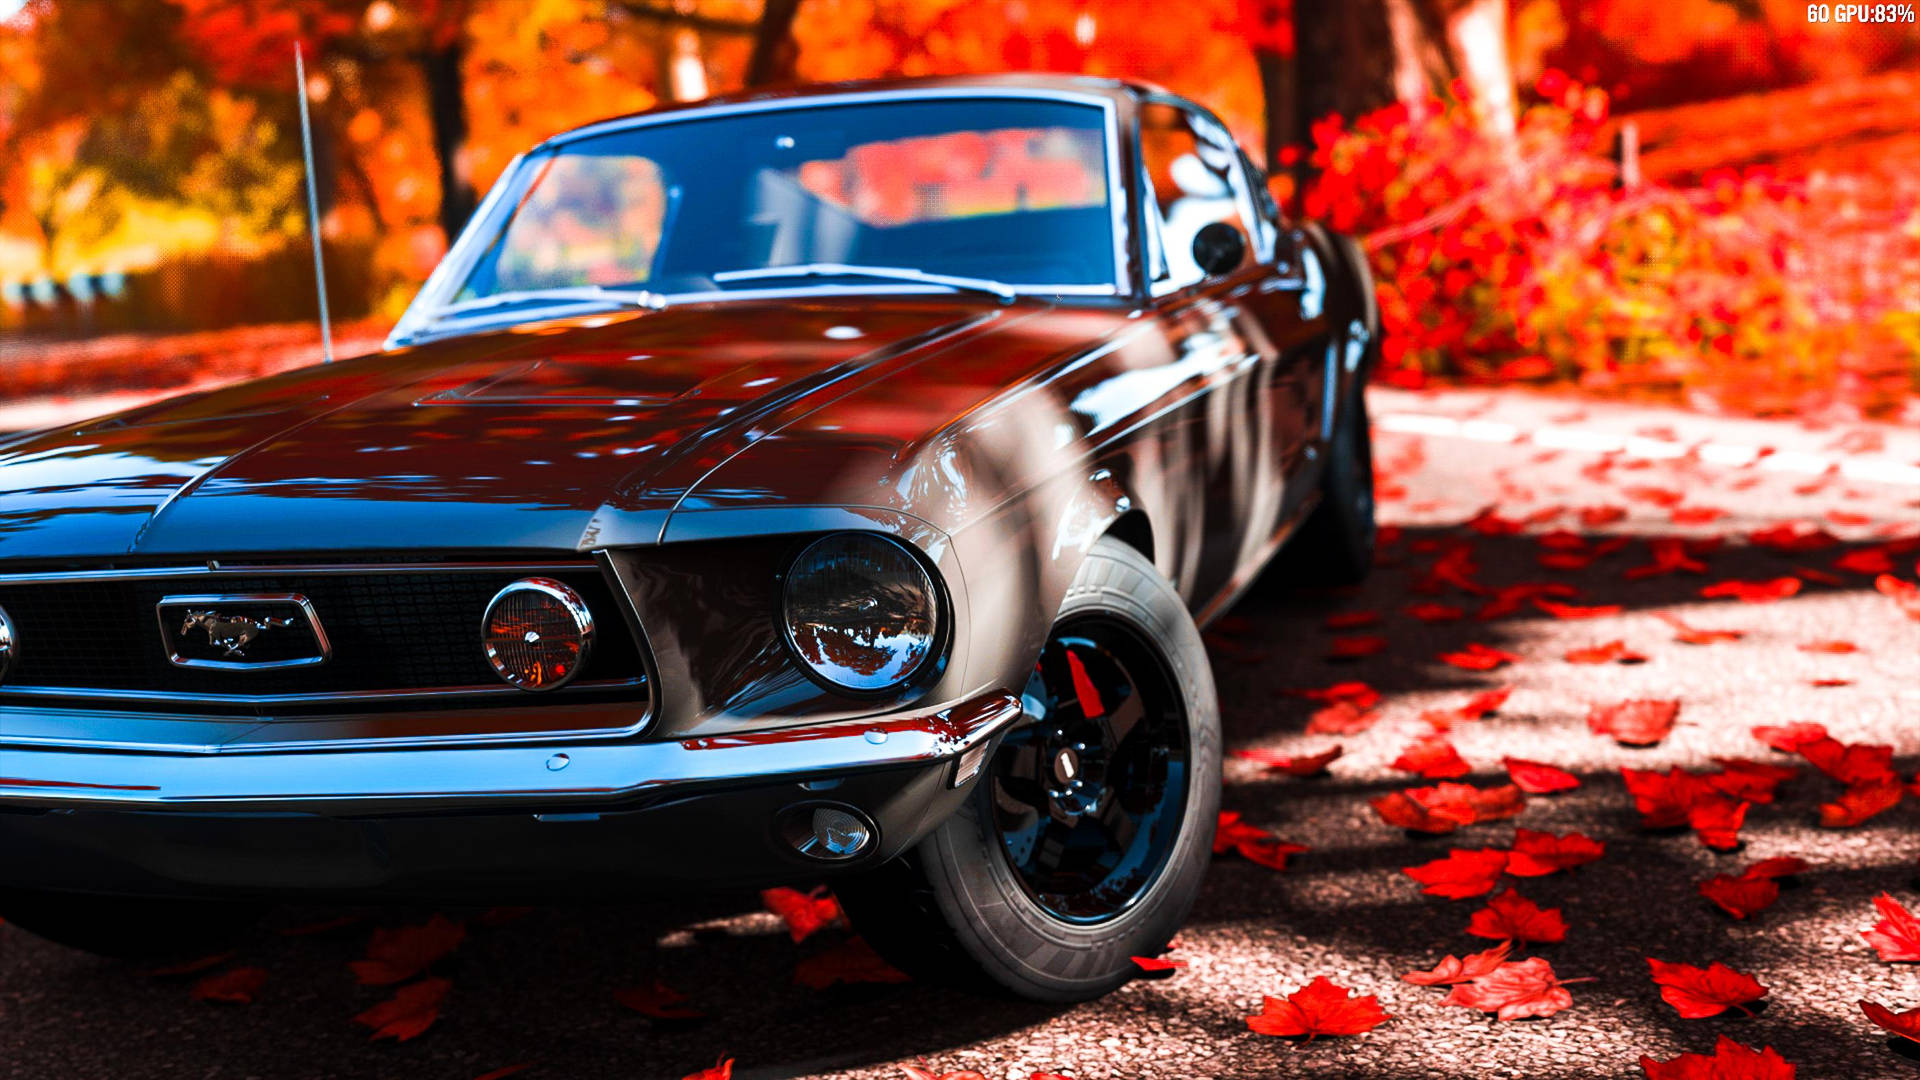 Customized Mustang for Speed-Lovers Wallpaper